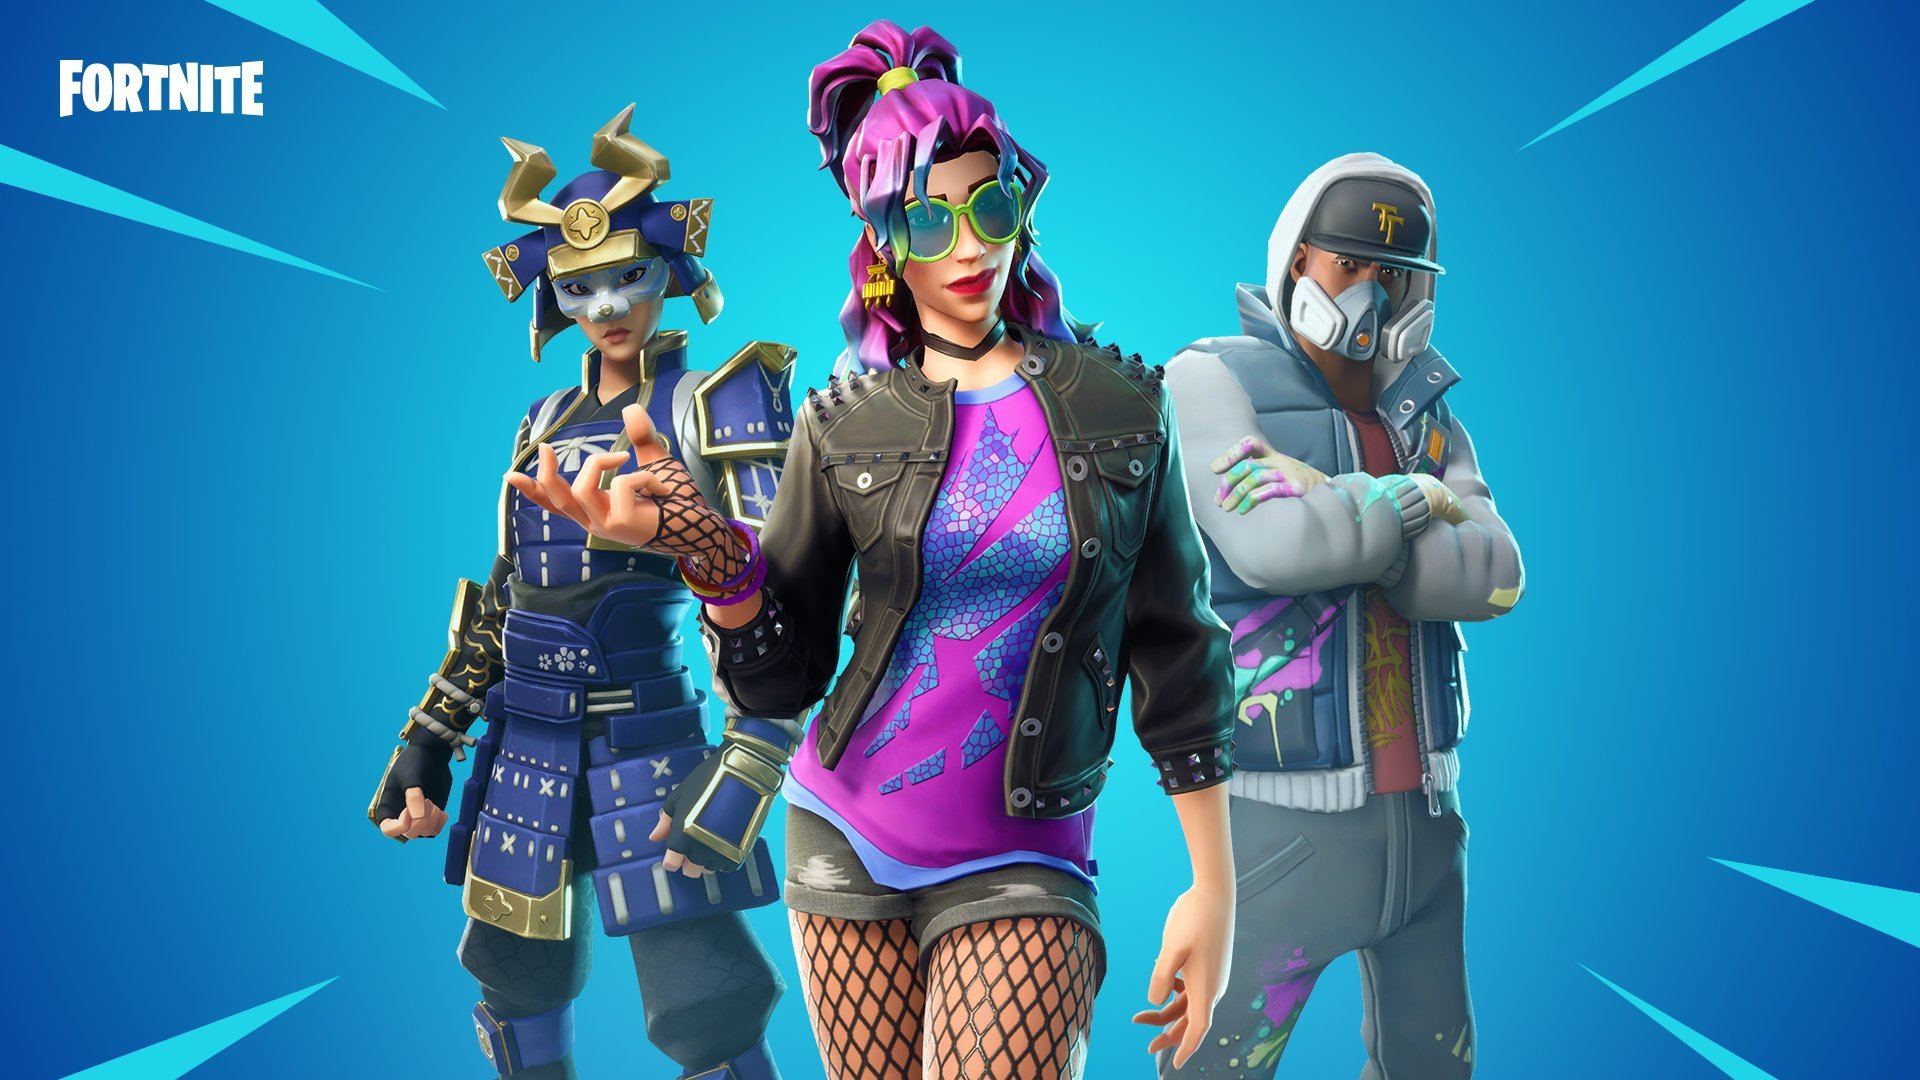 Honor Gains Exclusive Fortnite Skin In Bid To Attract More Young